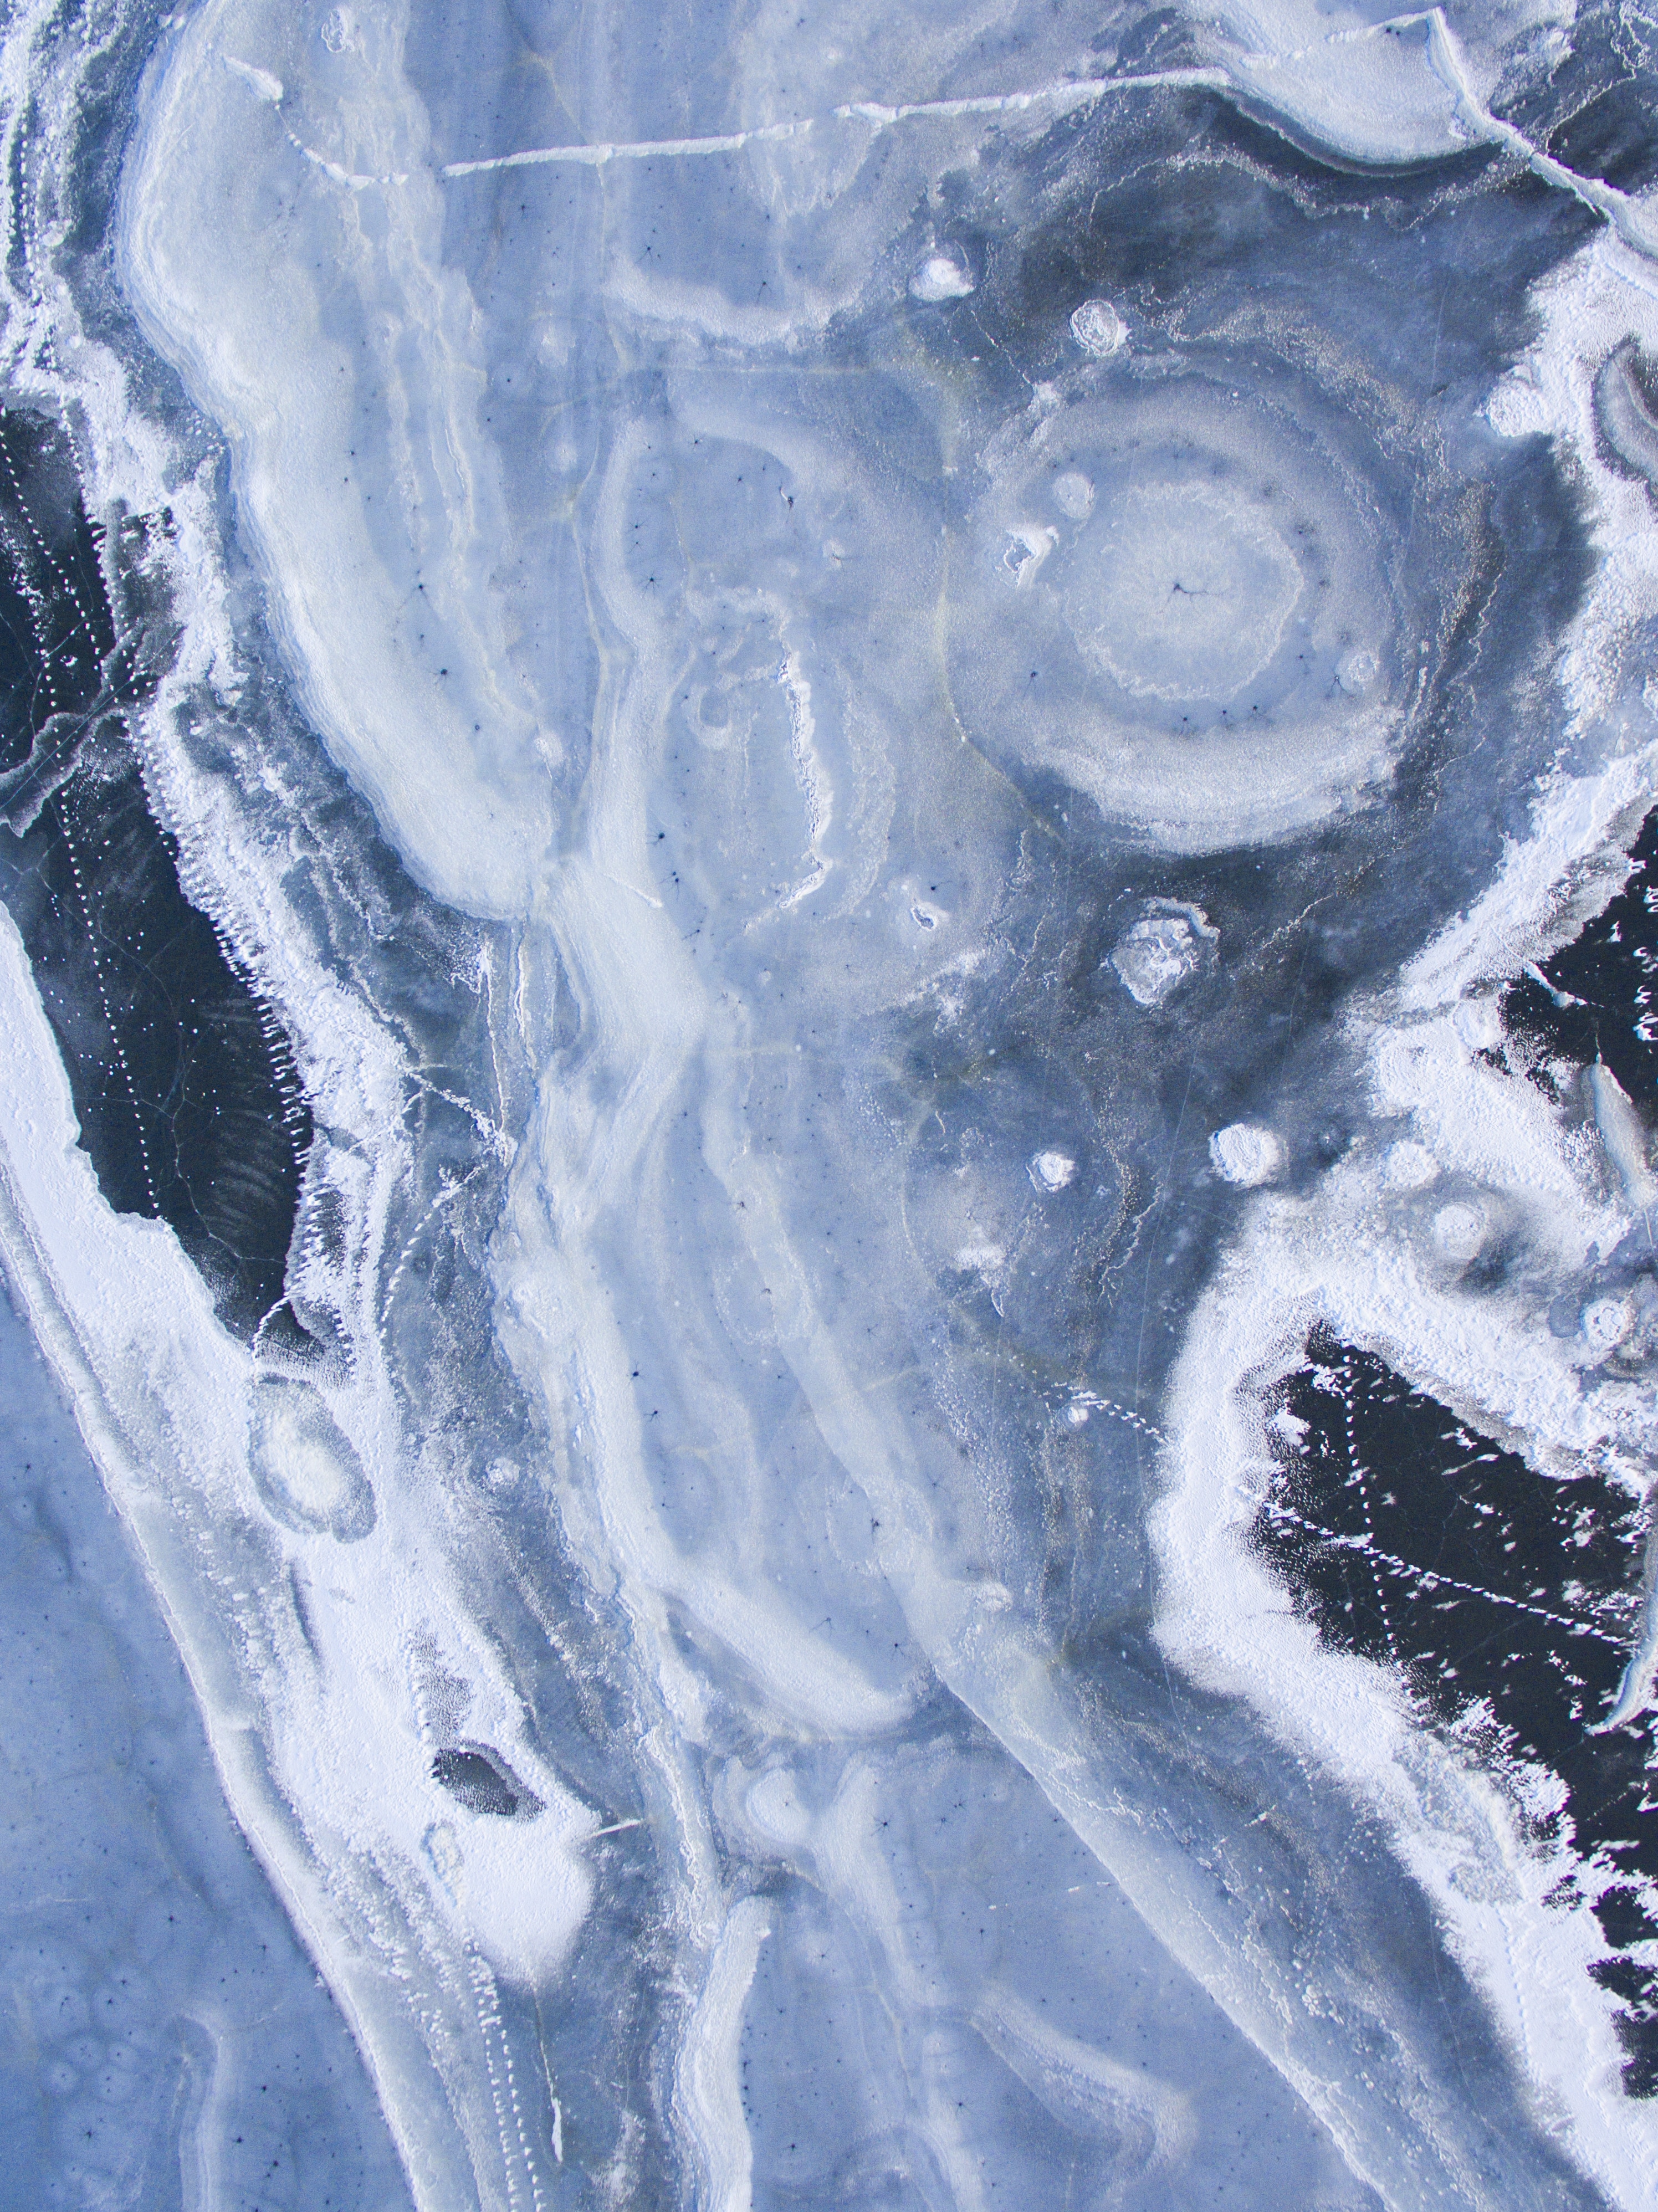 white and blue marble surface free image | Peakpx